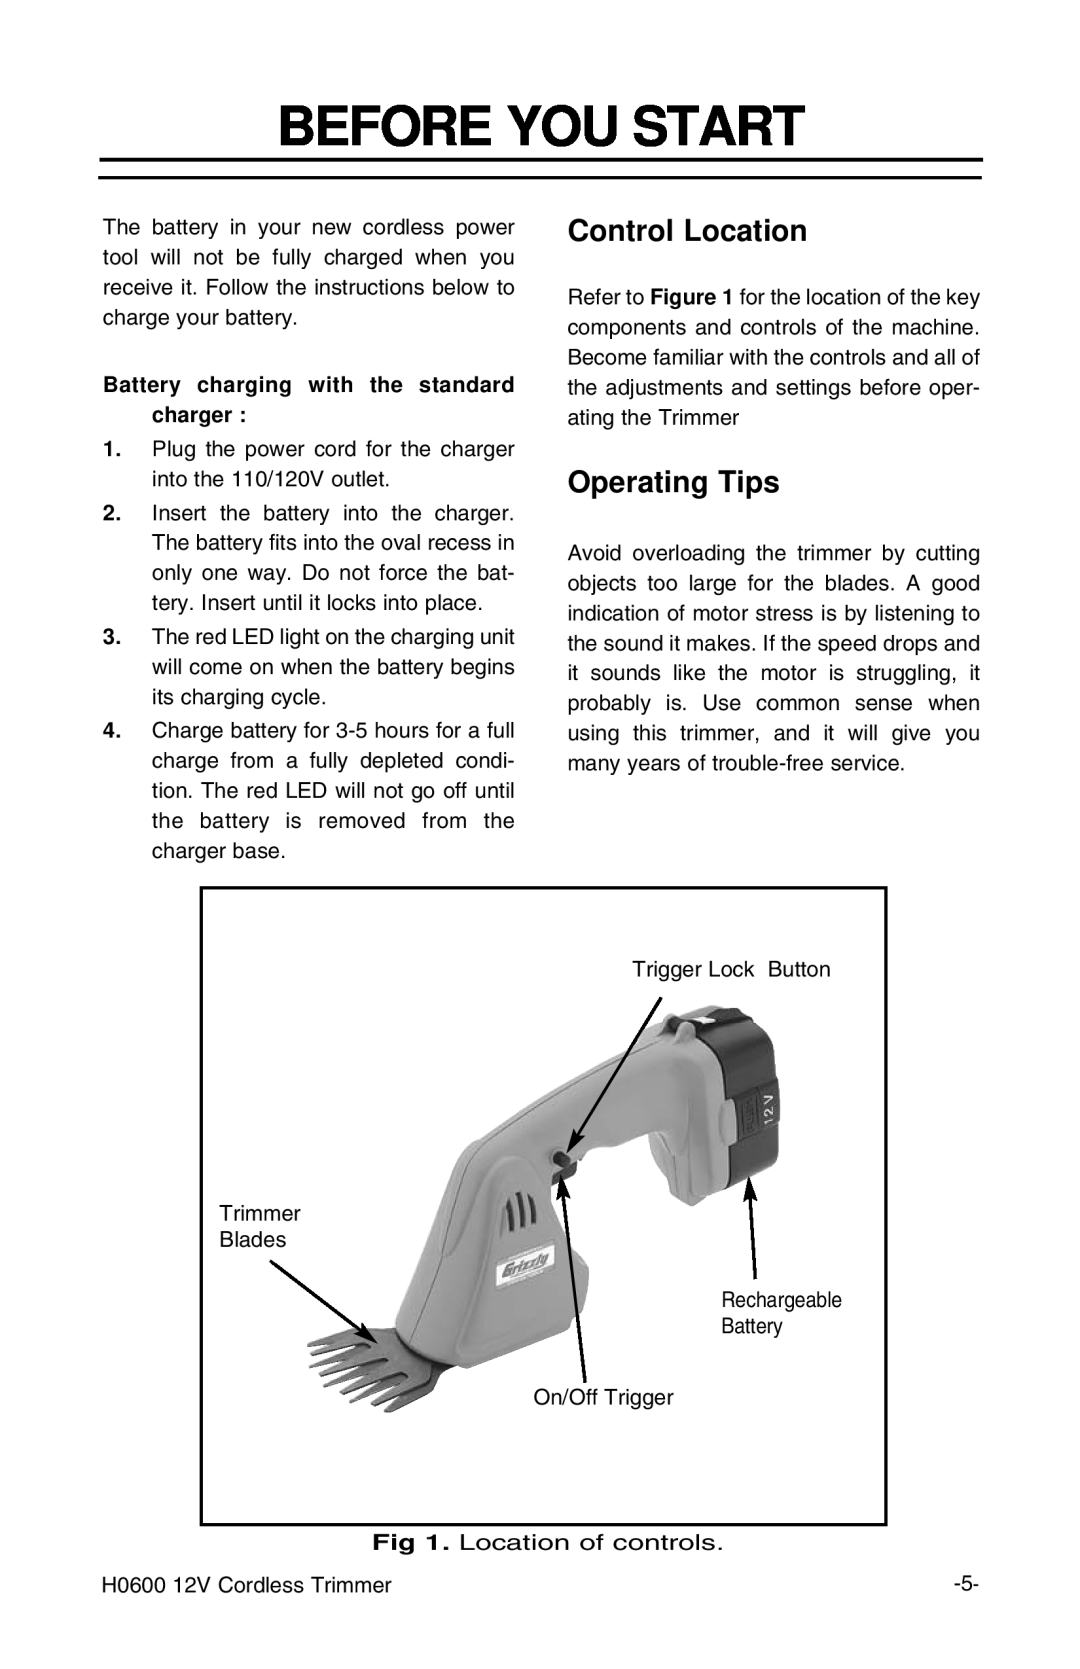 Grizzly H0600 instruction manual Before You Start, Control Location, Operating Tips 